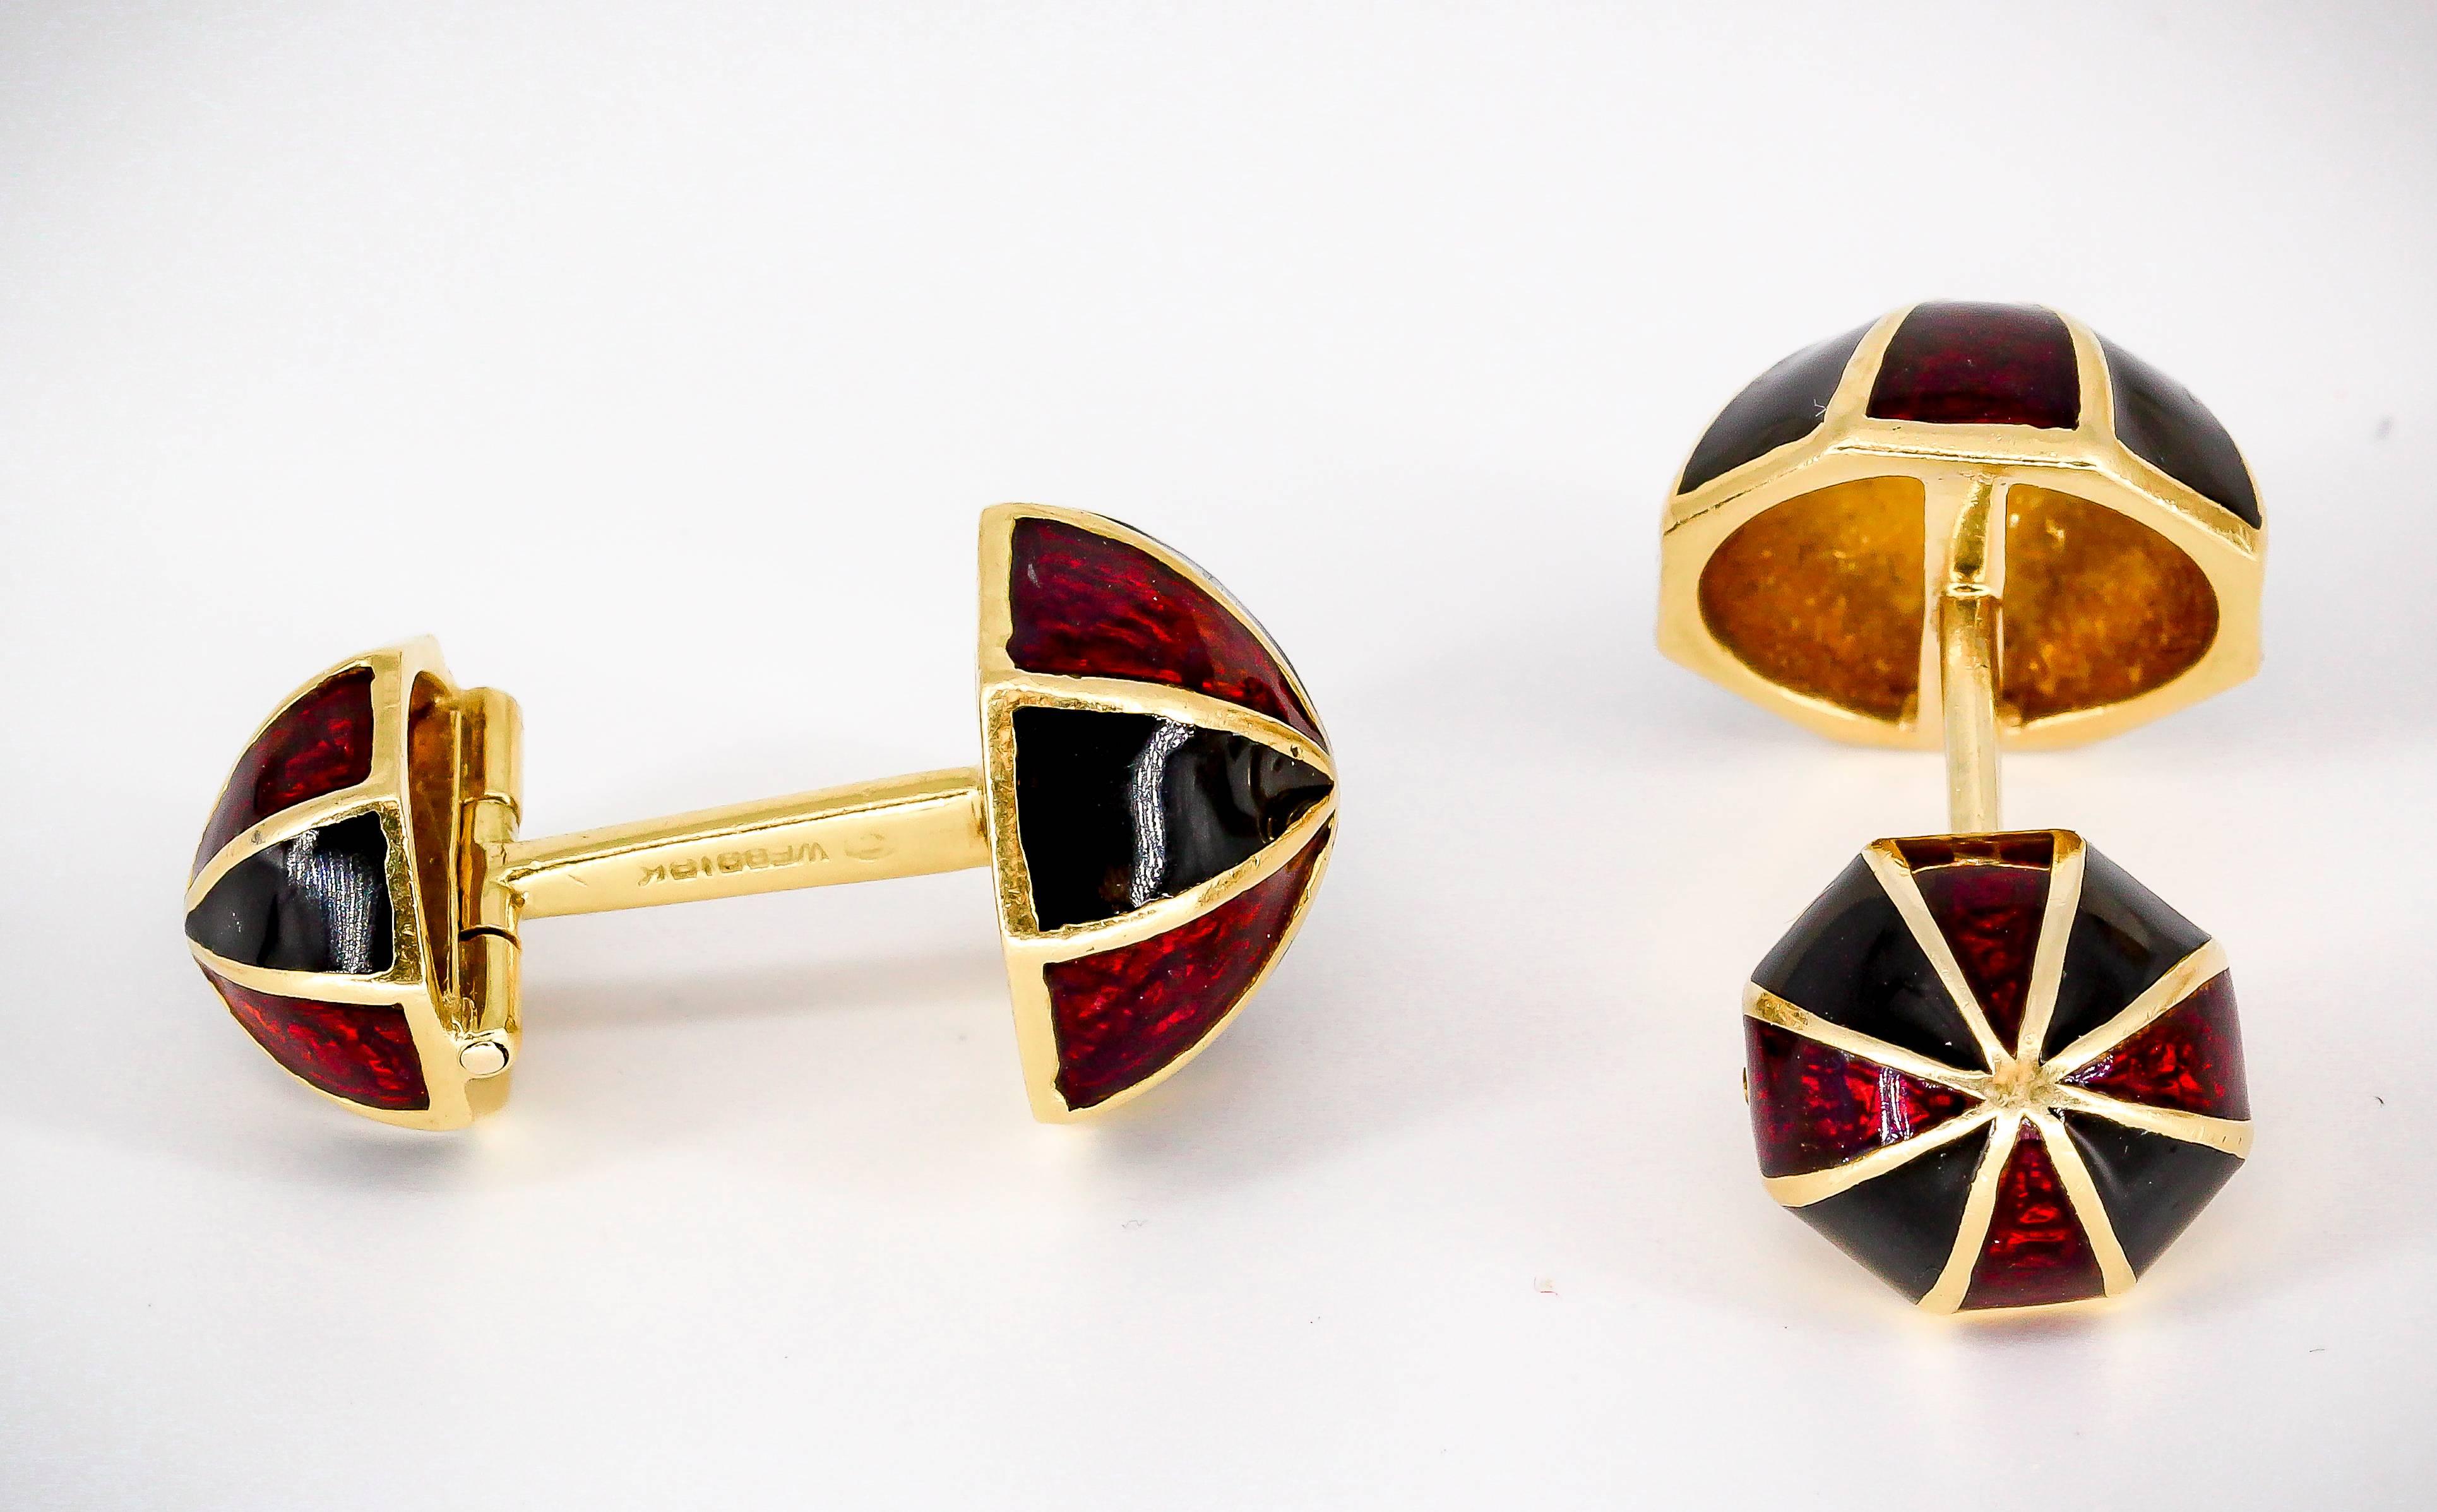 Handsome enamel and 18K yellow gold cufflinks by David Webb circa 1970s. They feature an alternating pattern of red and black enamel.  Very handsome and easy to put on.

Hallmarks: Webb, 18k.